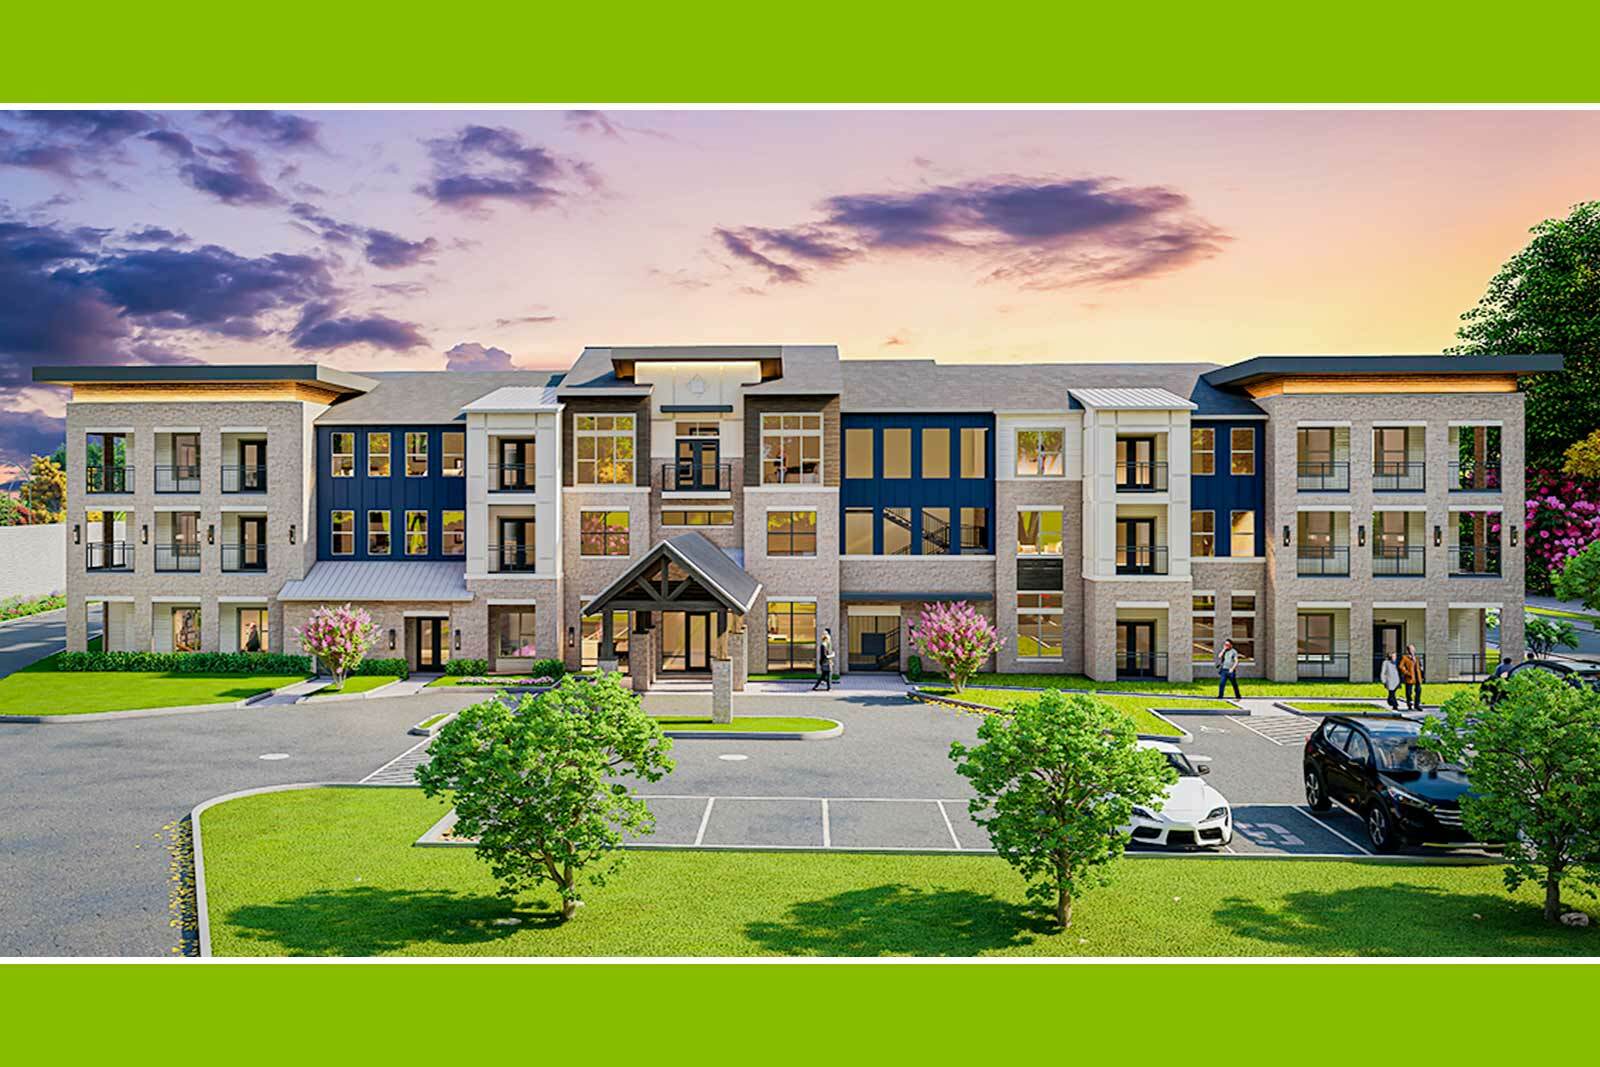 Rendering of Fossil Creek Apartment complex